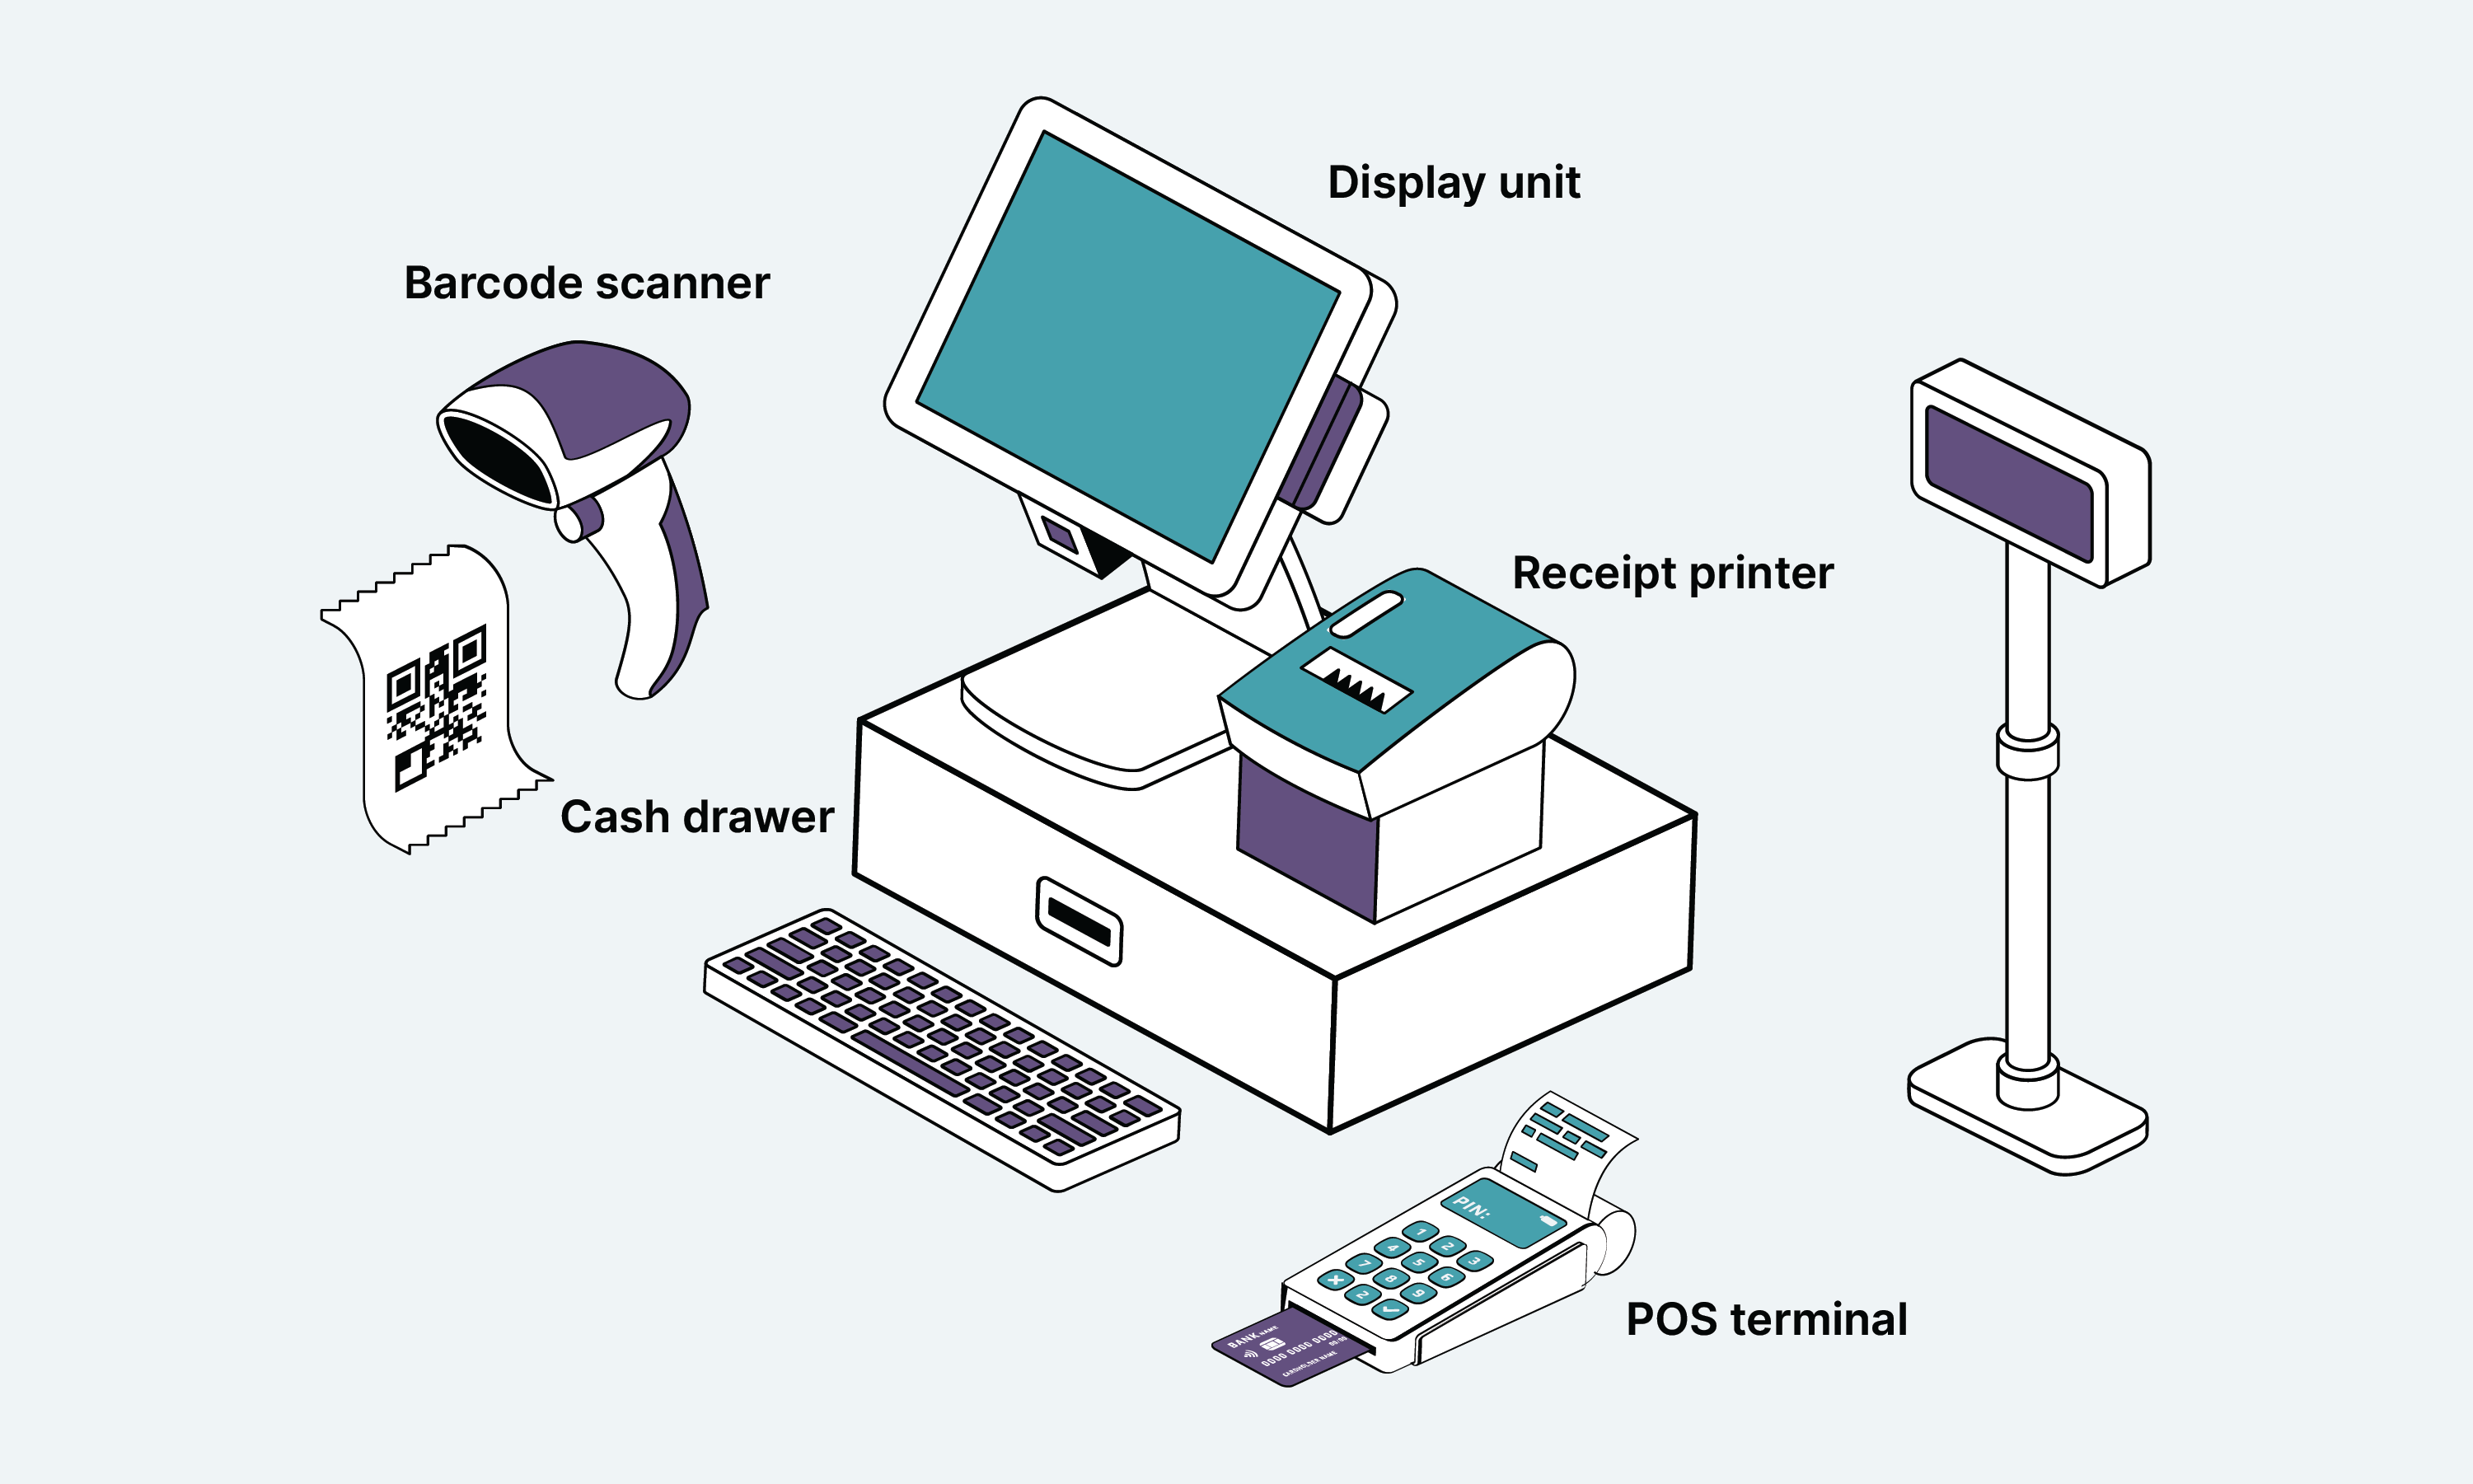 POS system hardware including display unit, POS terminal, cash drawer, barcode scanner and receipt printer